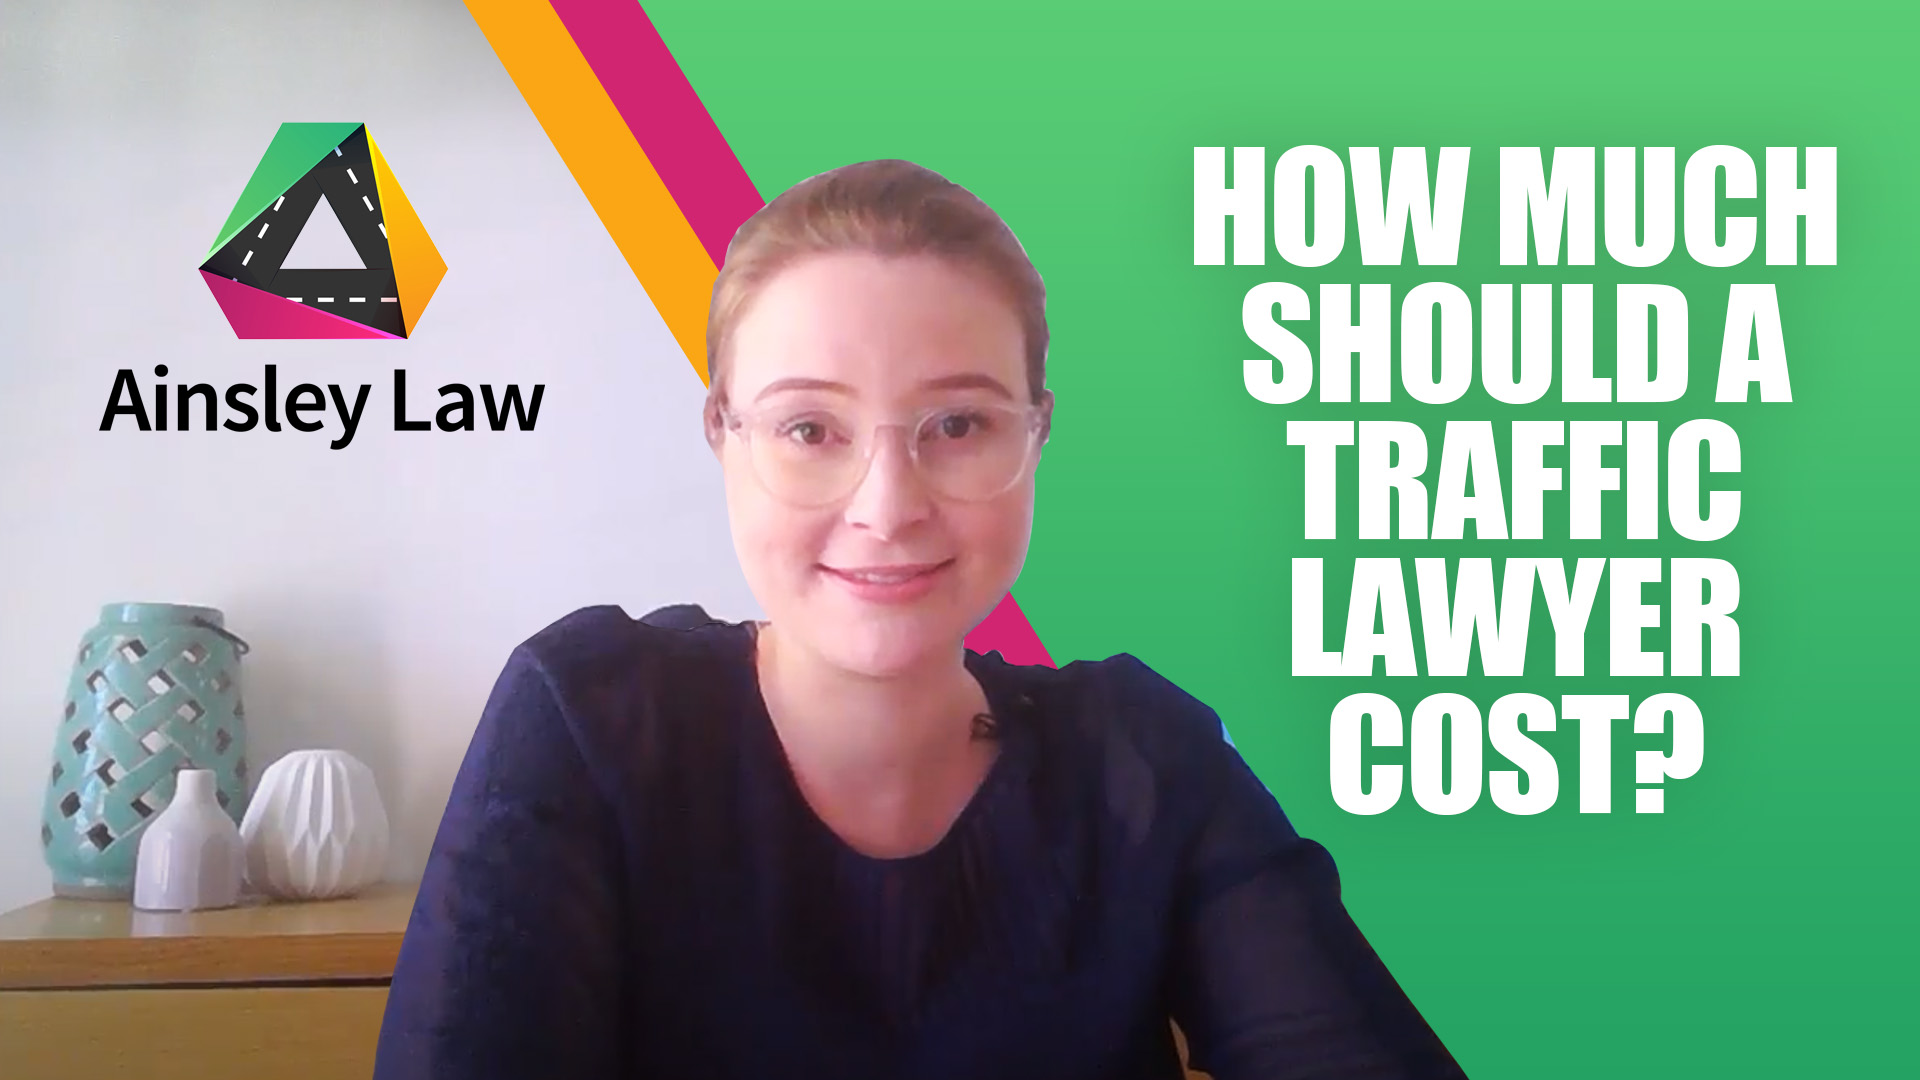 How Much Should A Traffic Lawyer Cost?